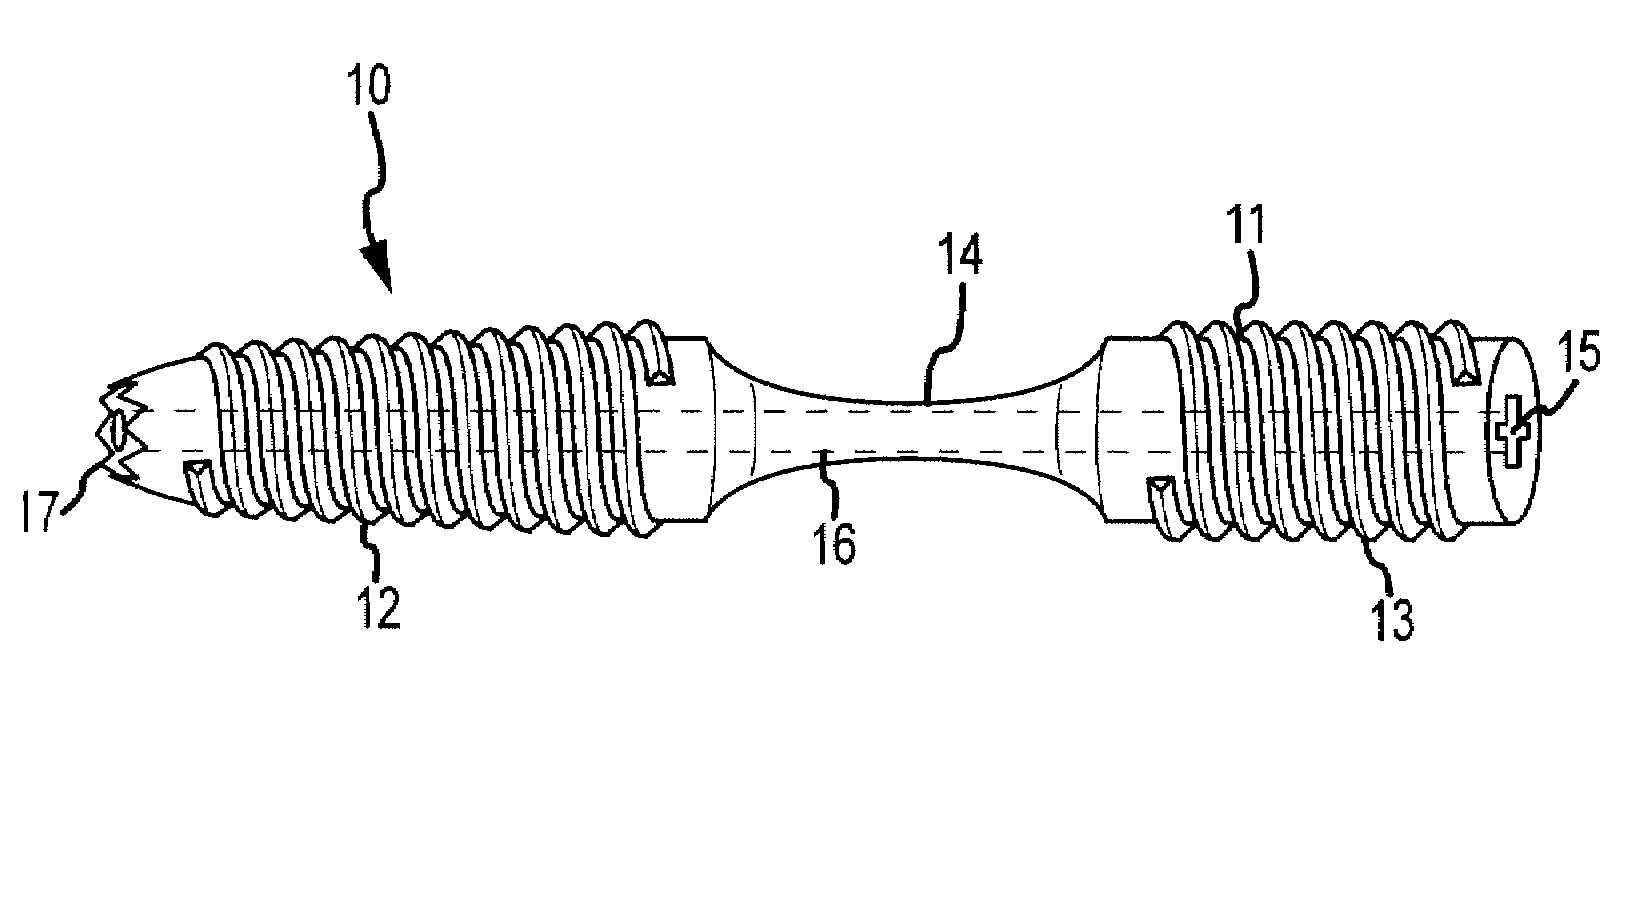 Joint fusion device